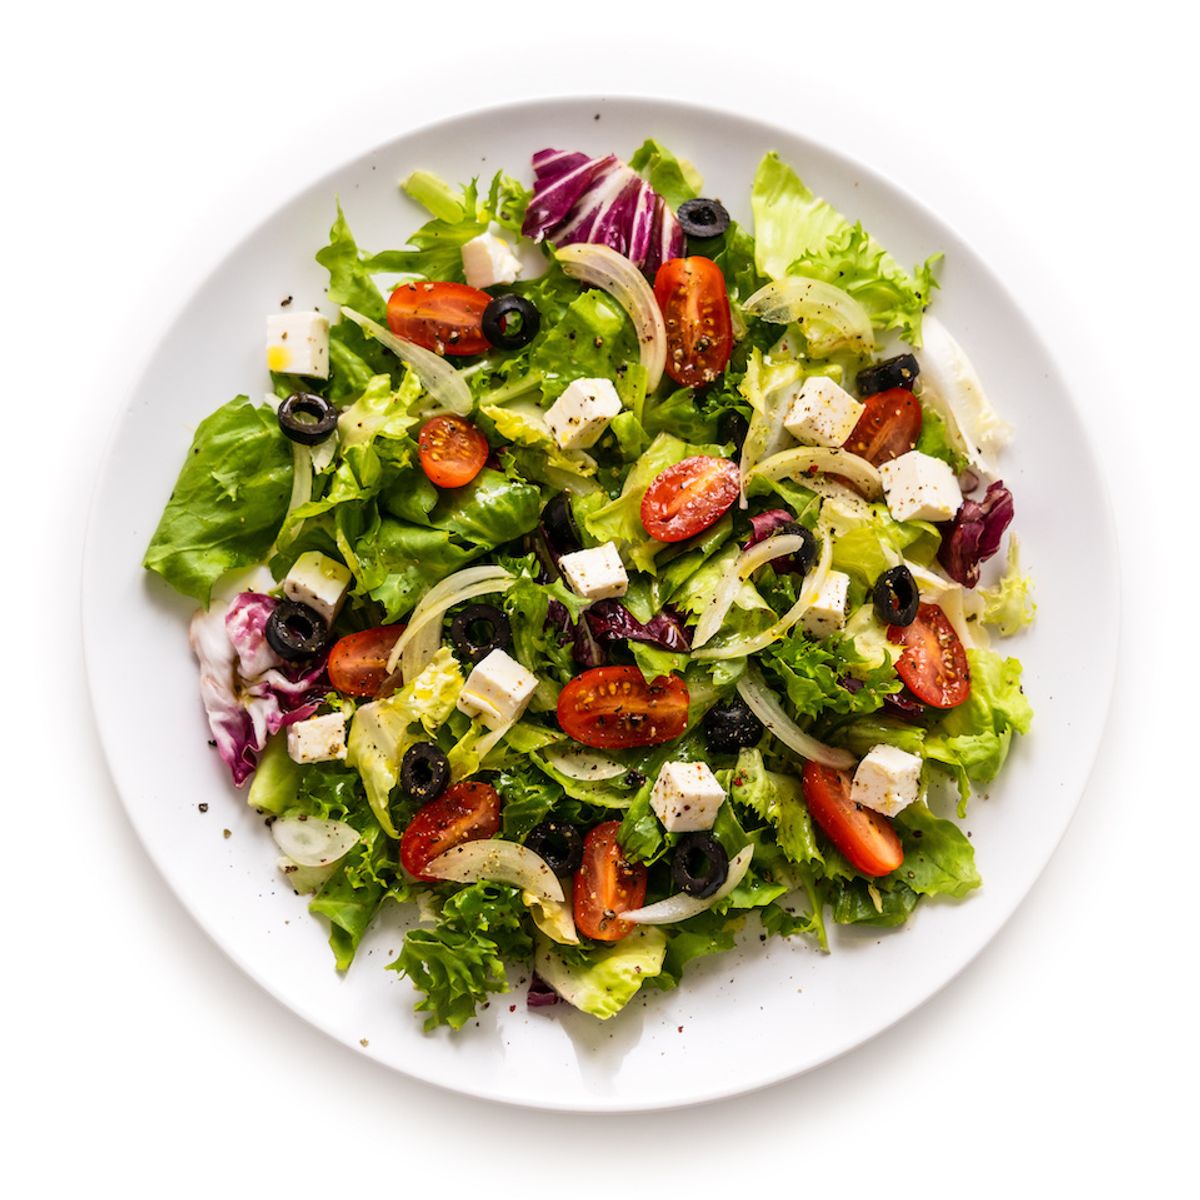 Lettuce Celebrate National Salad Month with American Legend Homes!